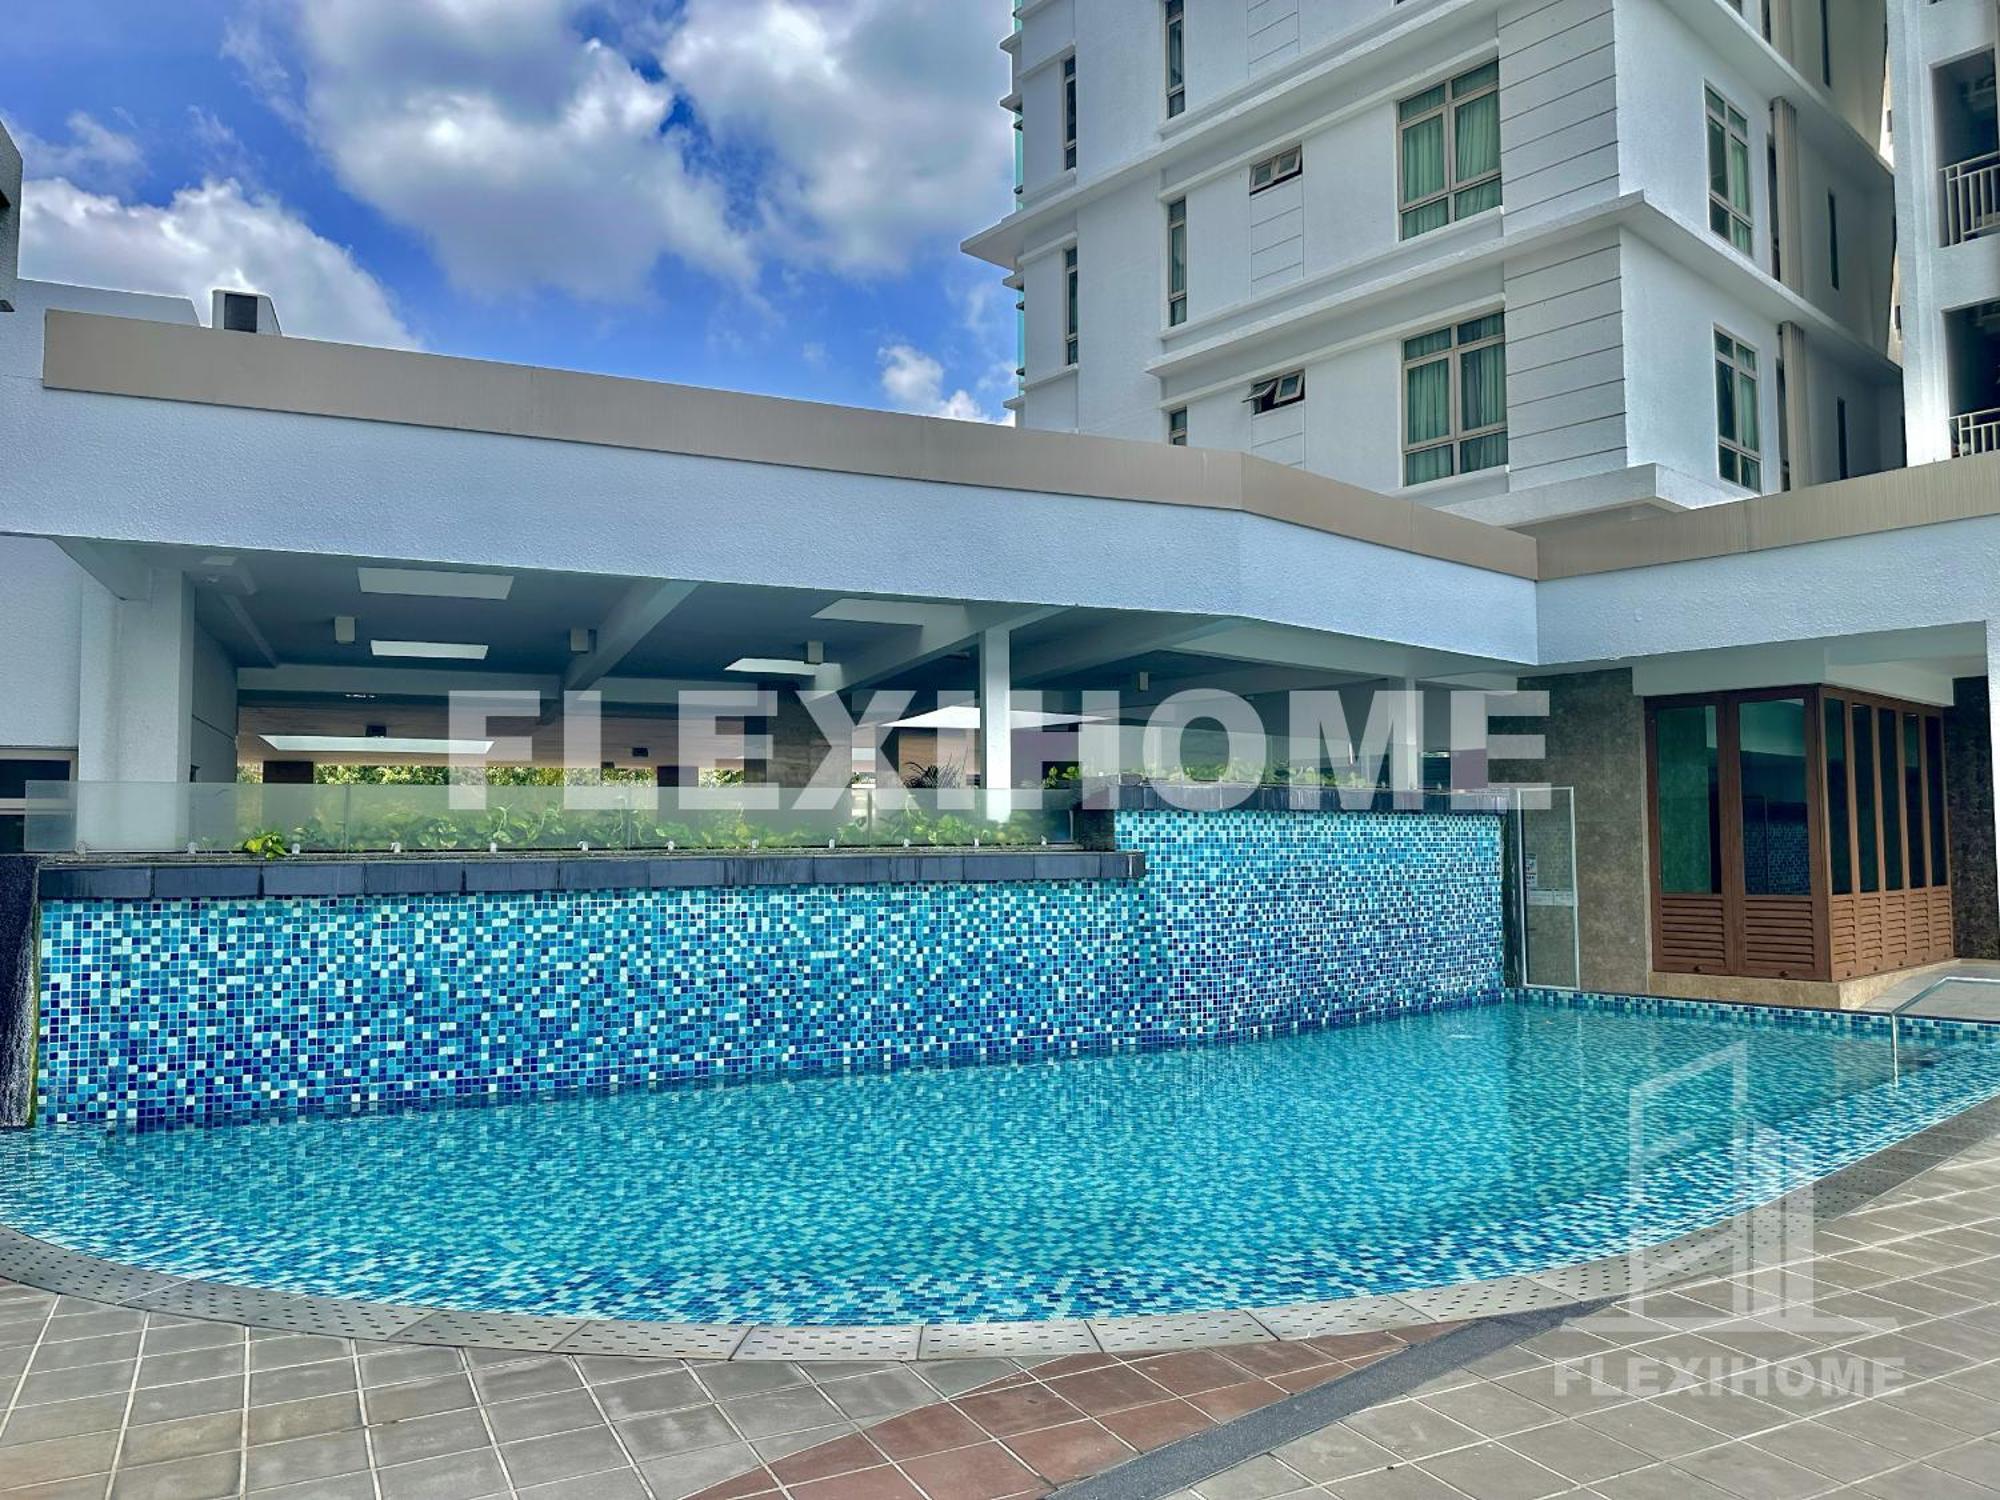 9Am-5Pm, Same Day Check In And Check Out, Work From Home, Shaftsbury-Cyberjaya, Comfy Home By Flexihome-My المظهر الخارجي الصورة